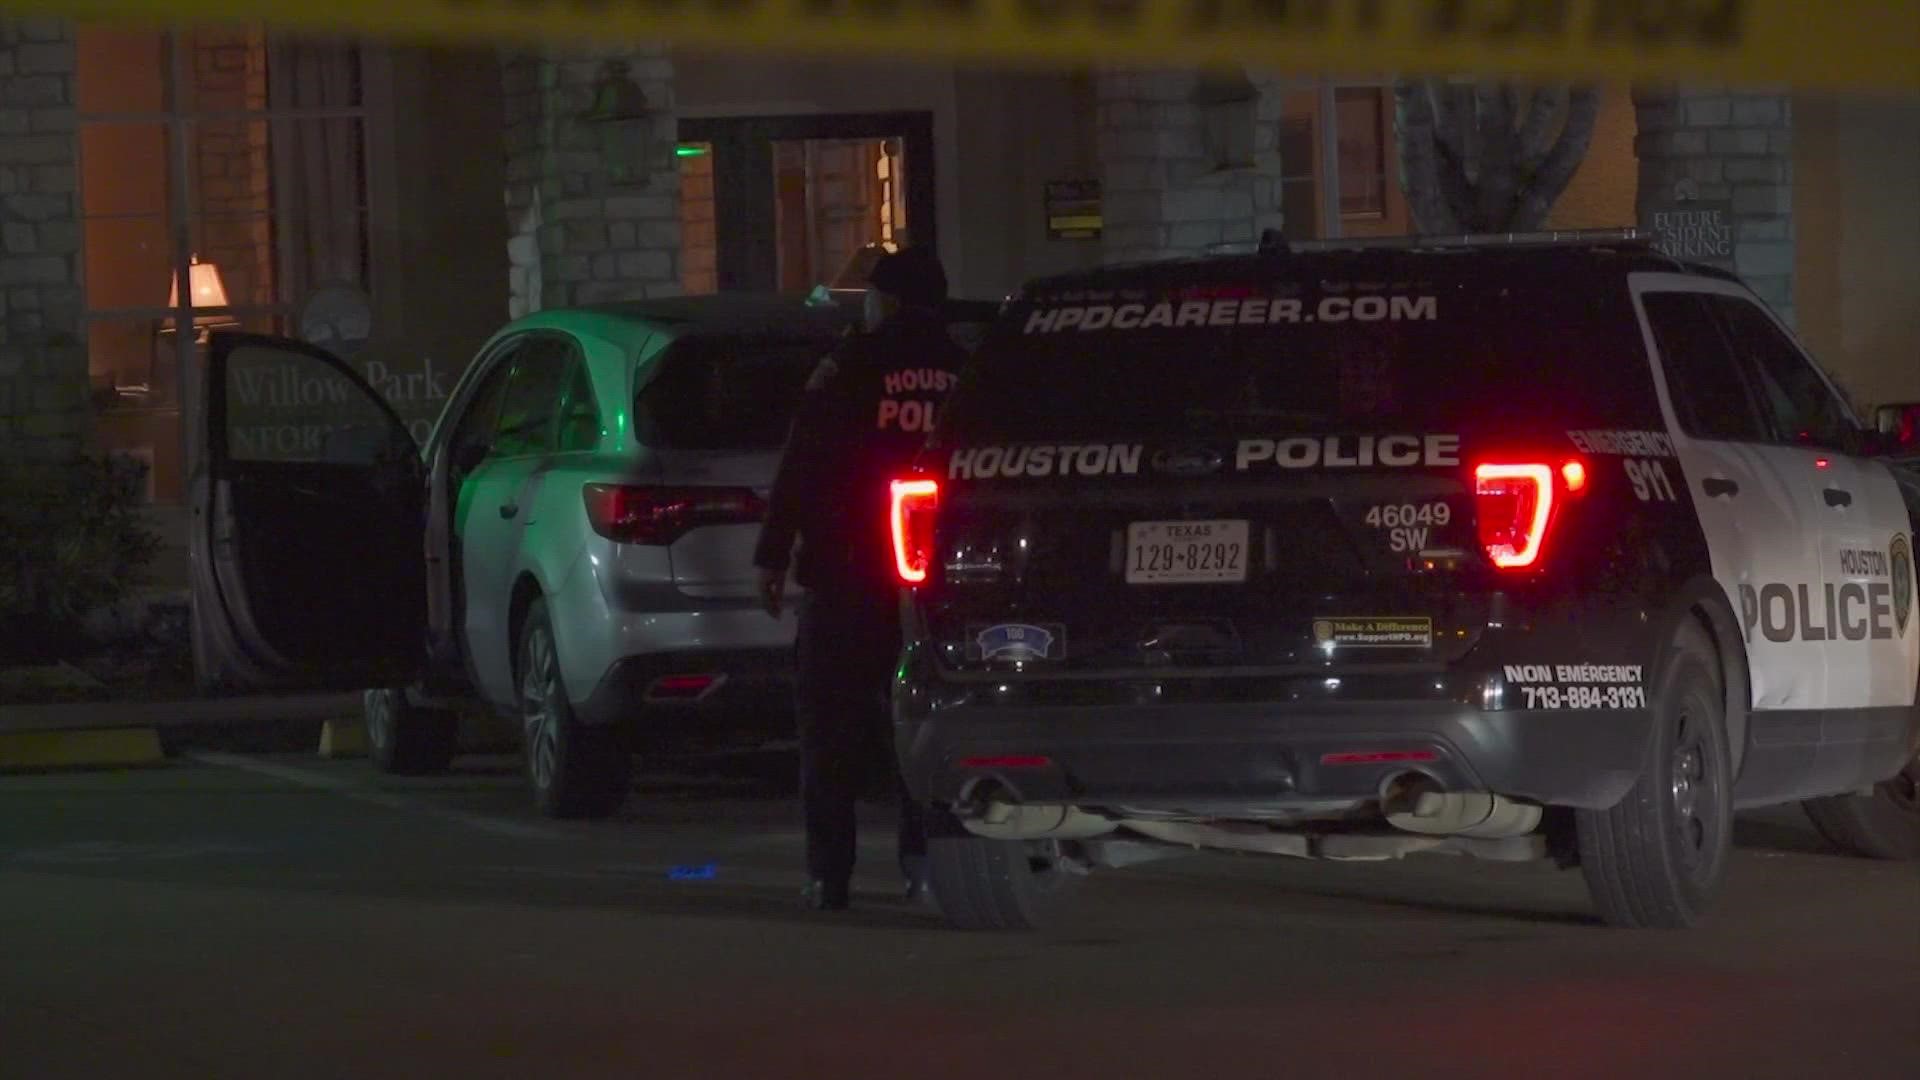 A man in his 20s was found shot to death outside of a car in southwest Houston near Missouri City early Tuesday, according to Houston police.